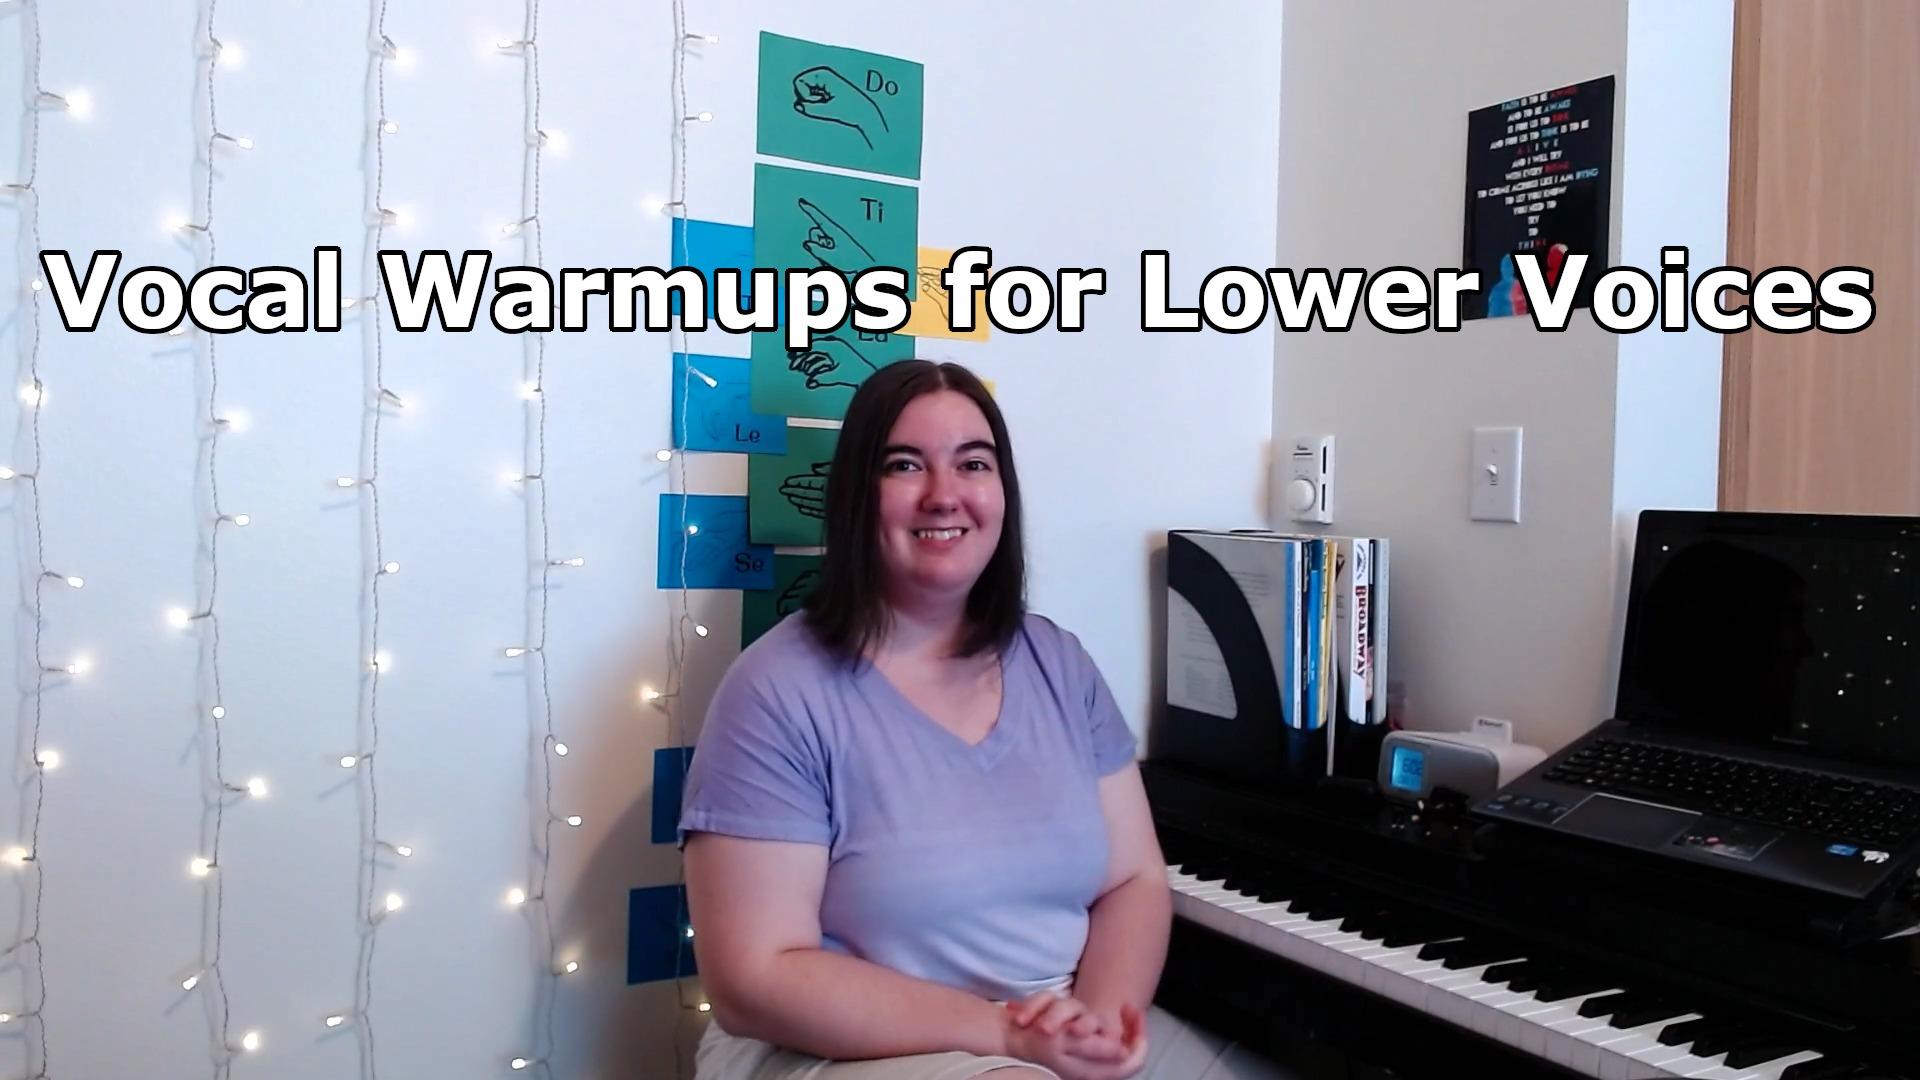 Full Range Vocal Warmups for Lower Voices